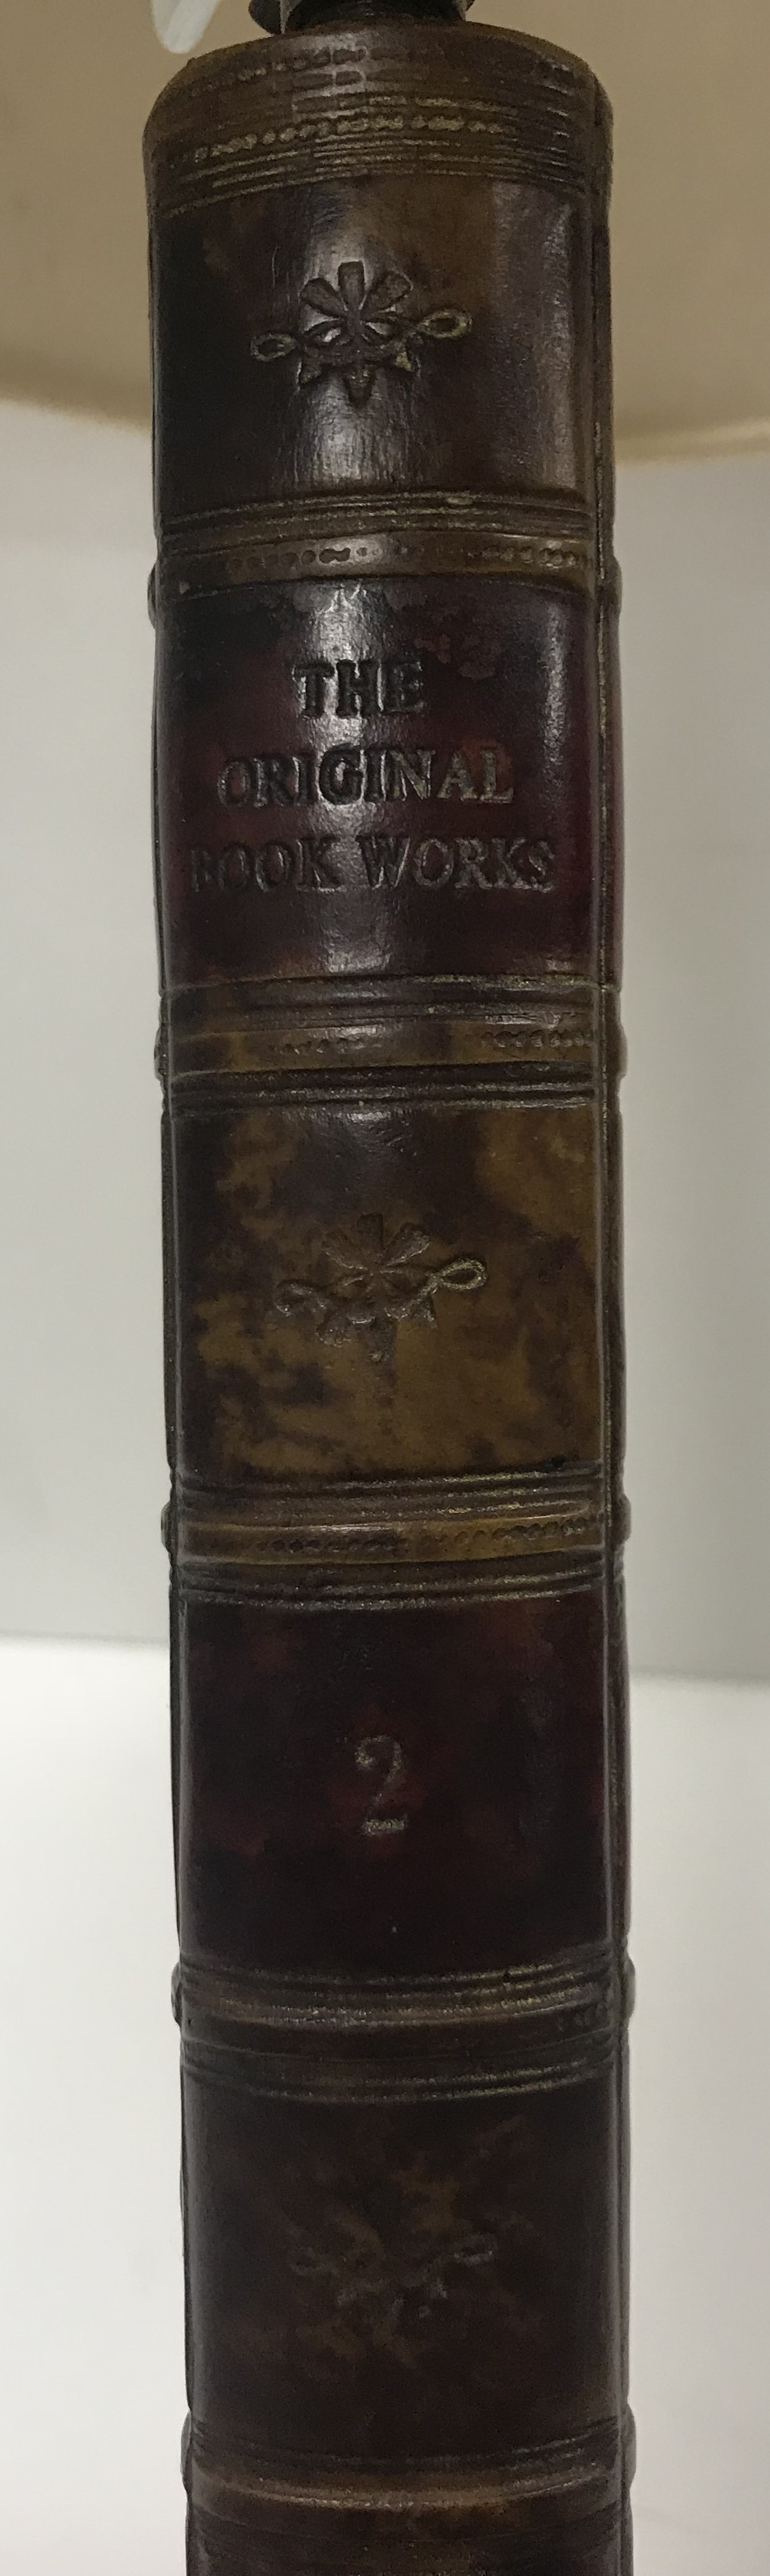 A decorative table lamp as book spines "Original Bookworks - 2" on a base of two books "Goldsmiths - Image 5 of 5